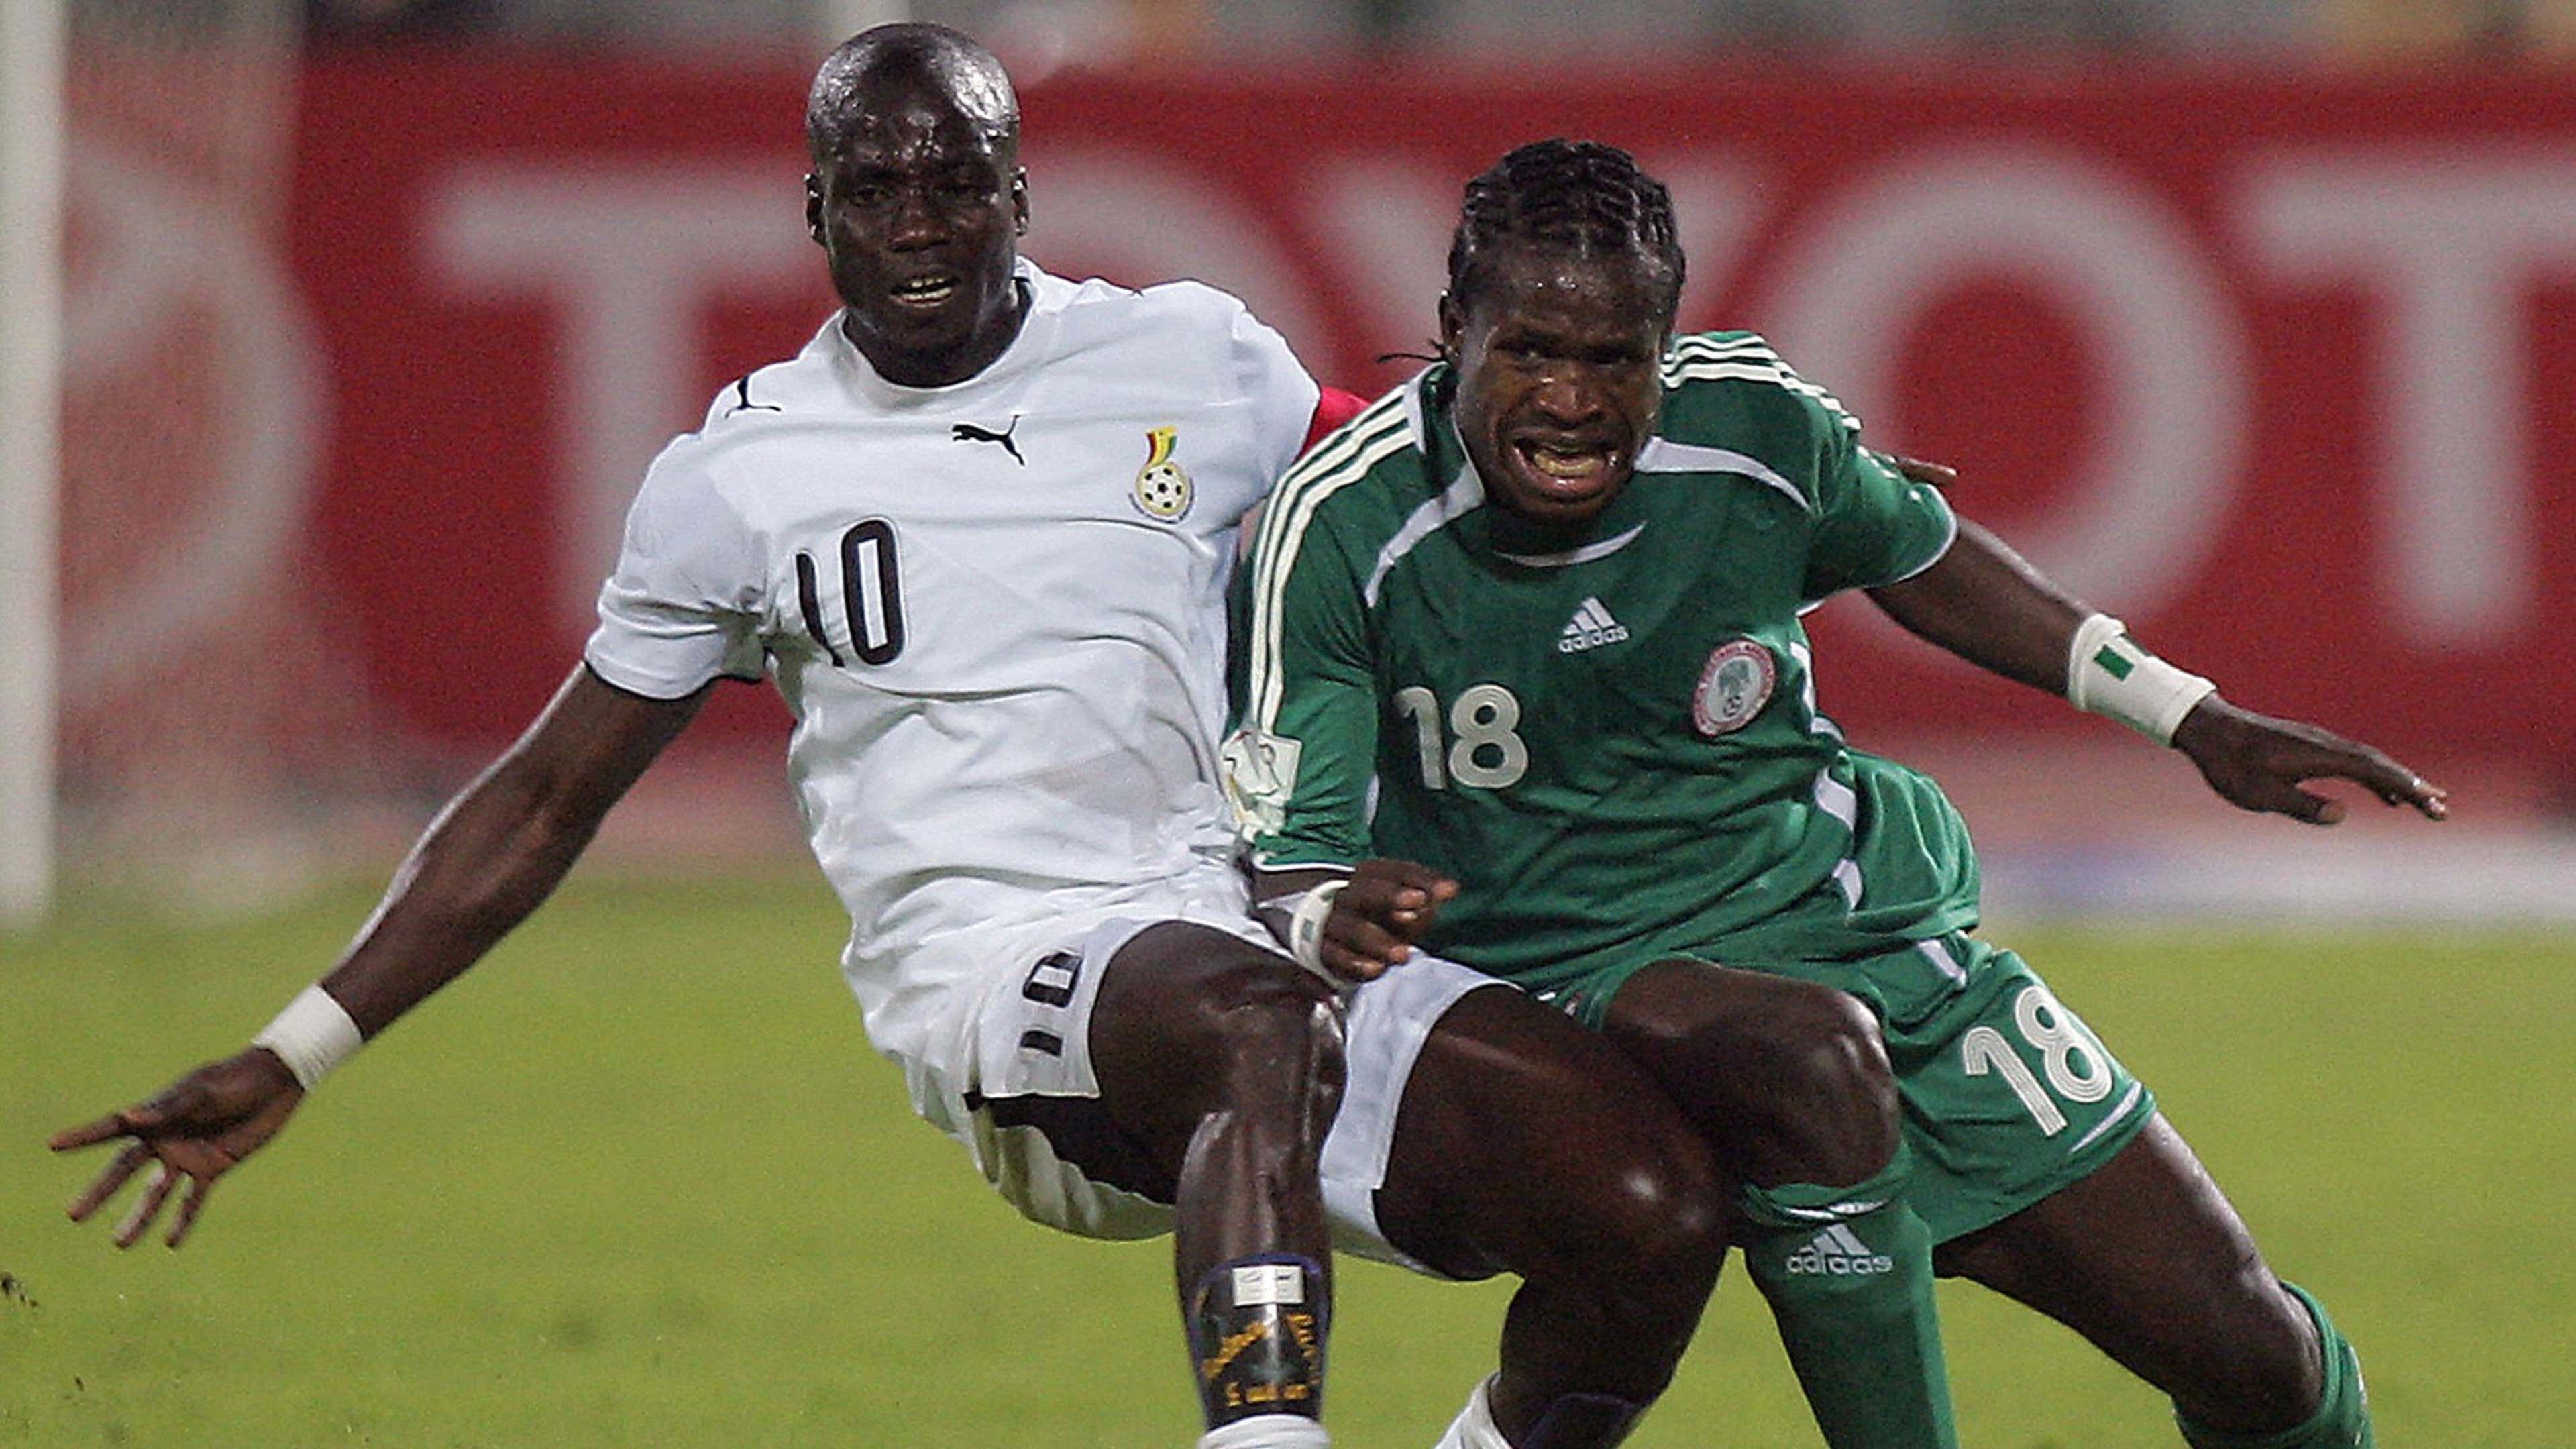 Nigeria settles for draw with Kenya: World Cup qualifiers